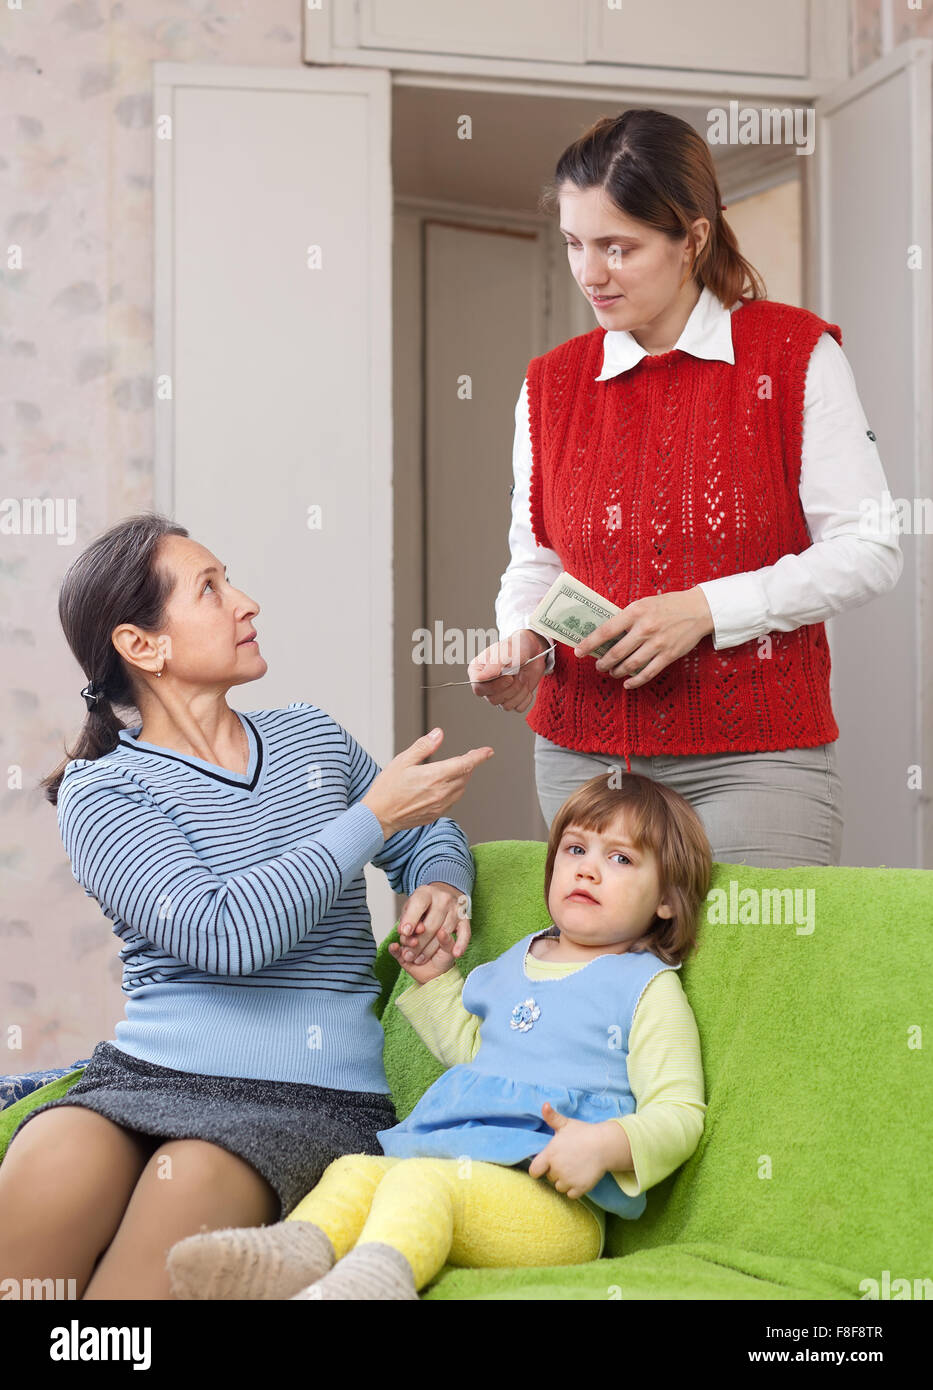 mother leaving baby with babysitter at home Stock Photo